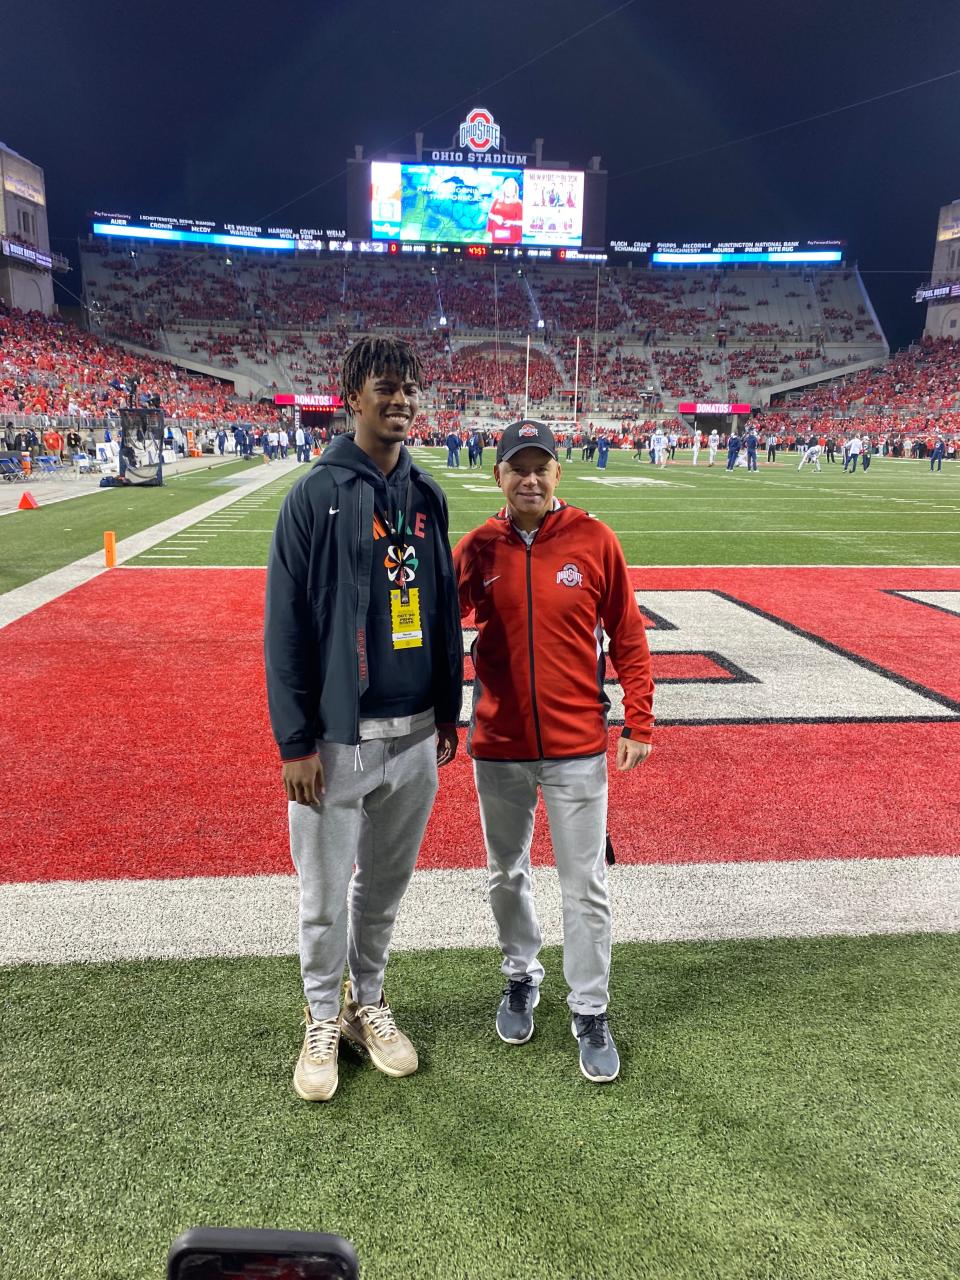 Windemere, Florida, power forward Sean Stewart poses for a photo with Ohio State men's basketball coach Chris Holtmann while on an official visit at the football game at Ohio Stadium on October 30, 2021.